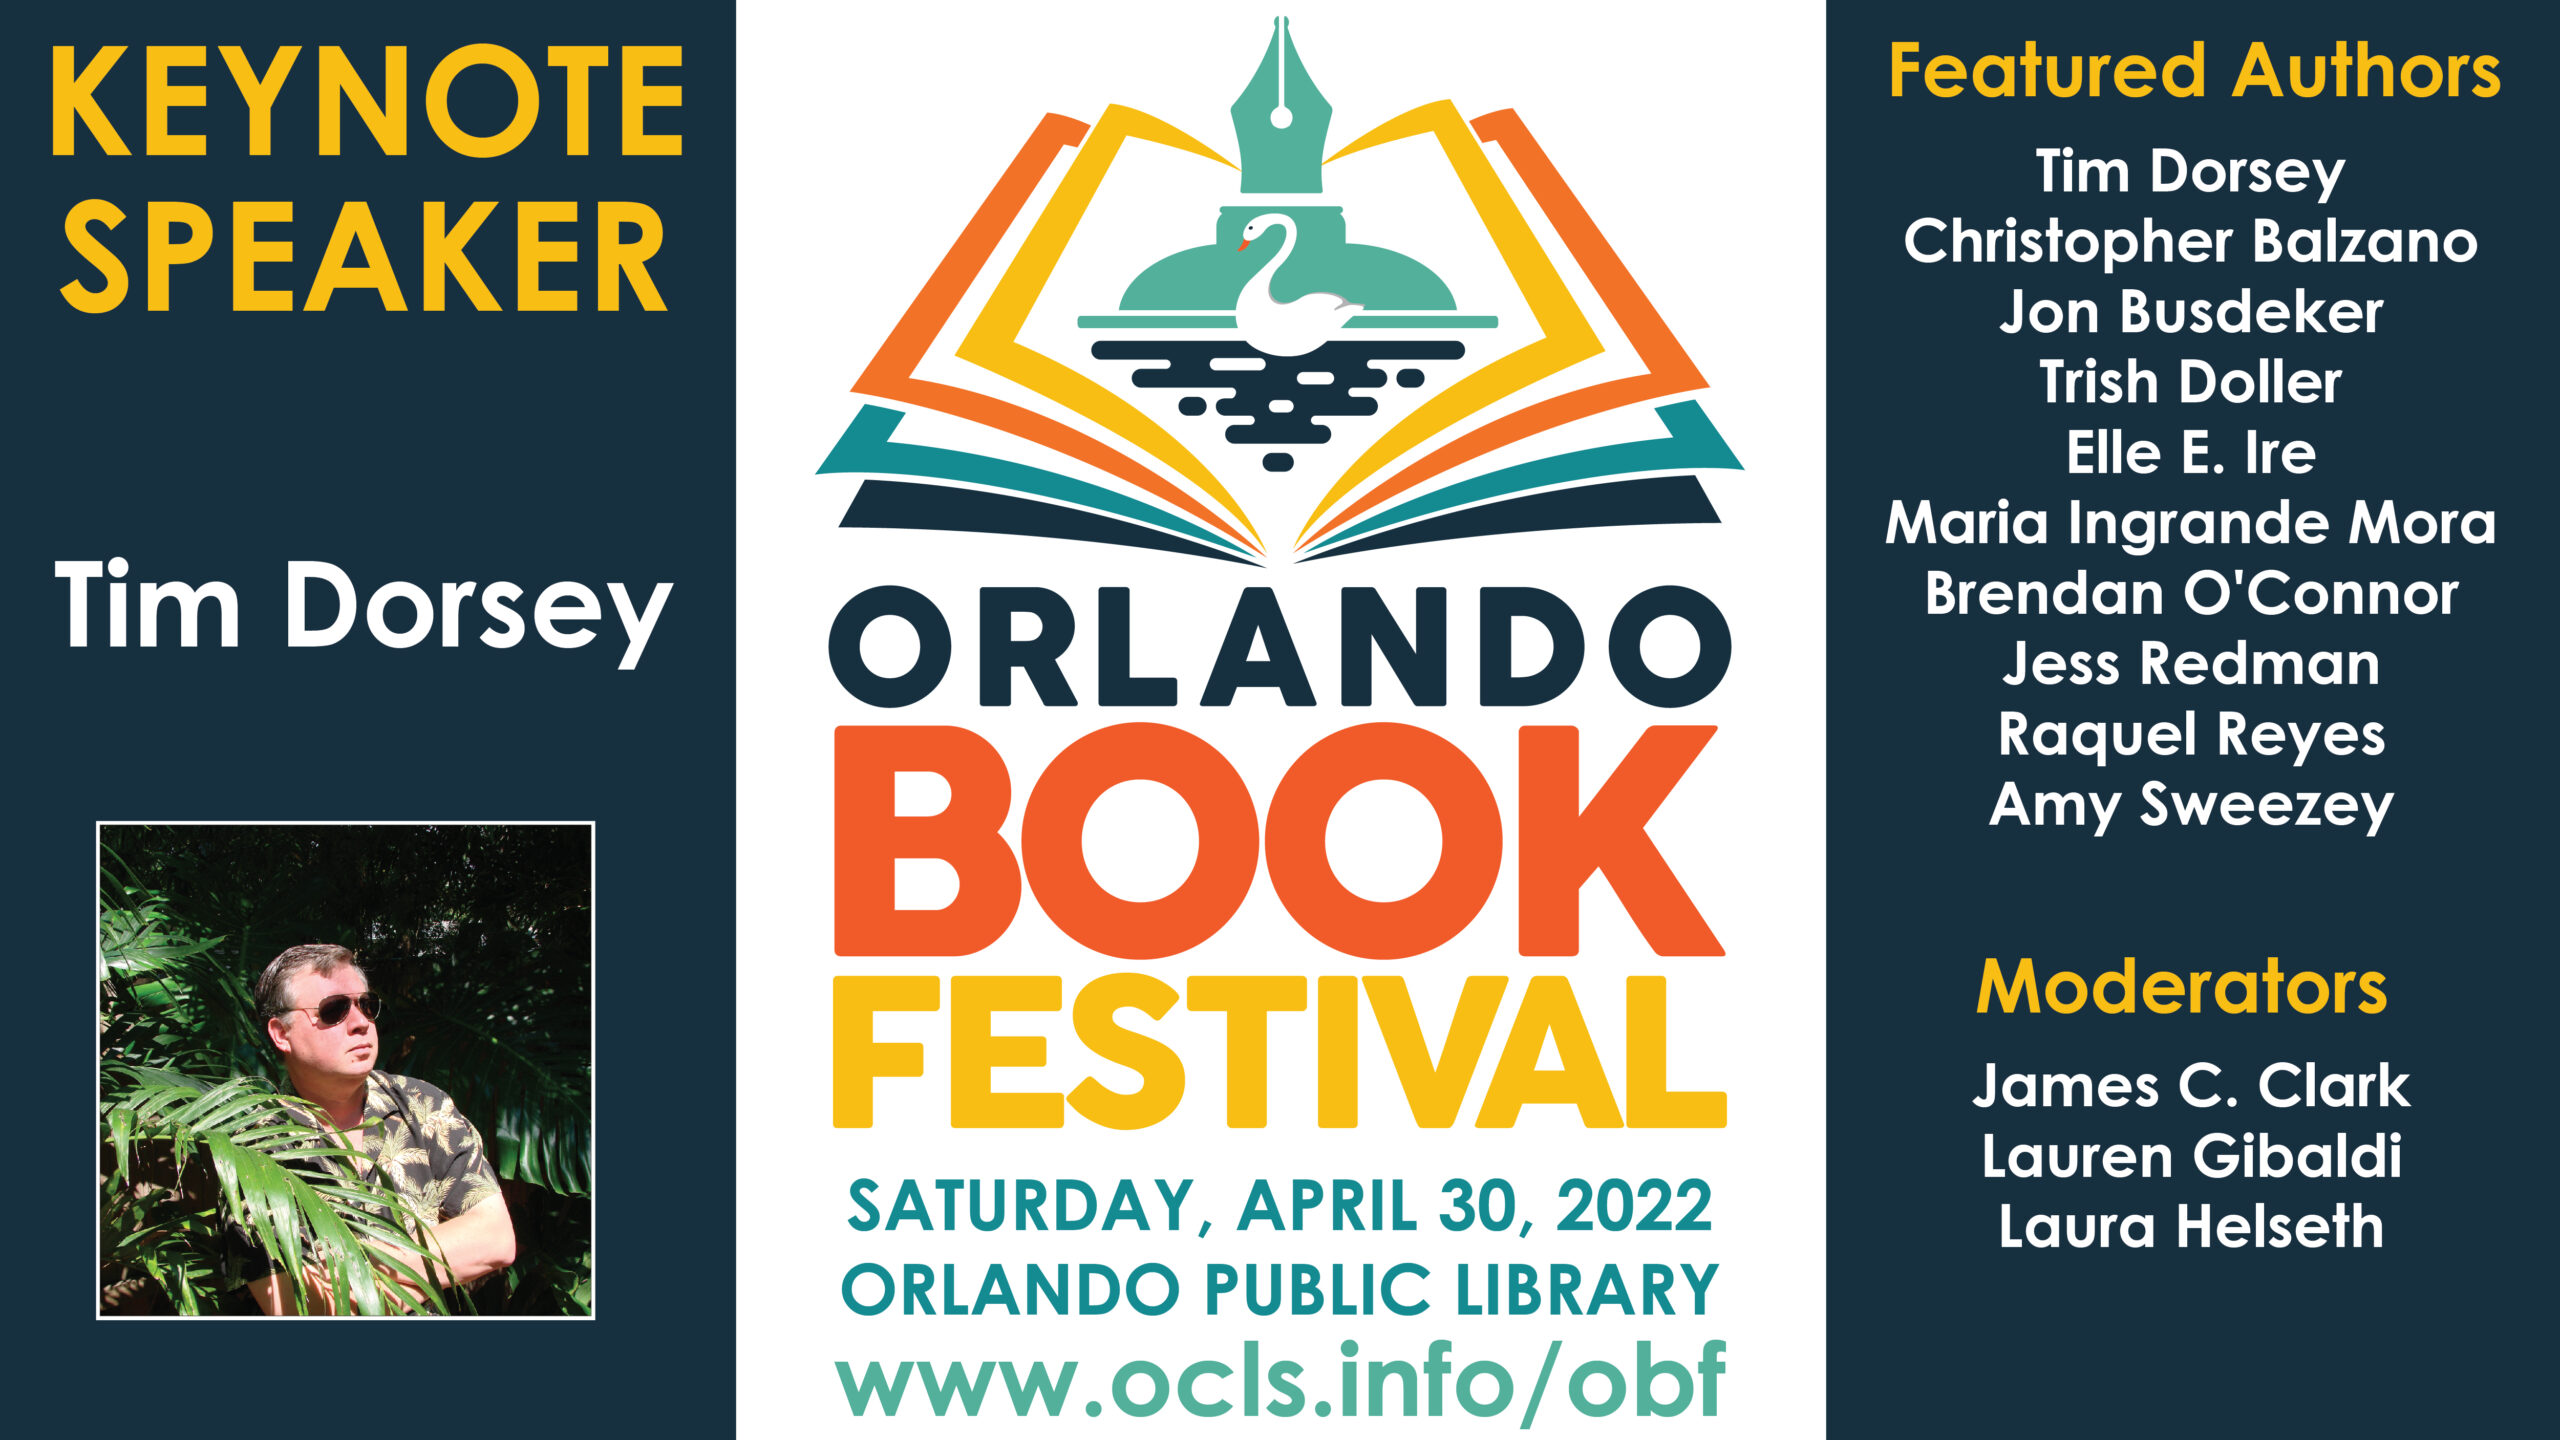 Downtown library hosting 2022 Orlando Book Festival on April 30th